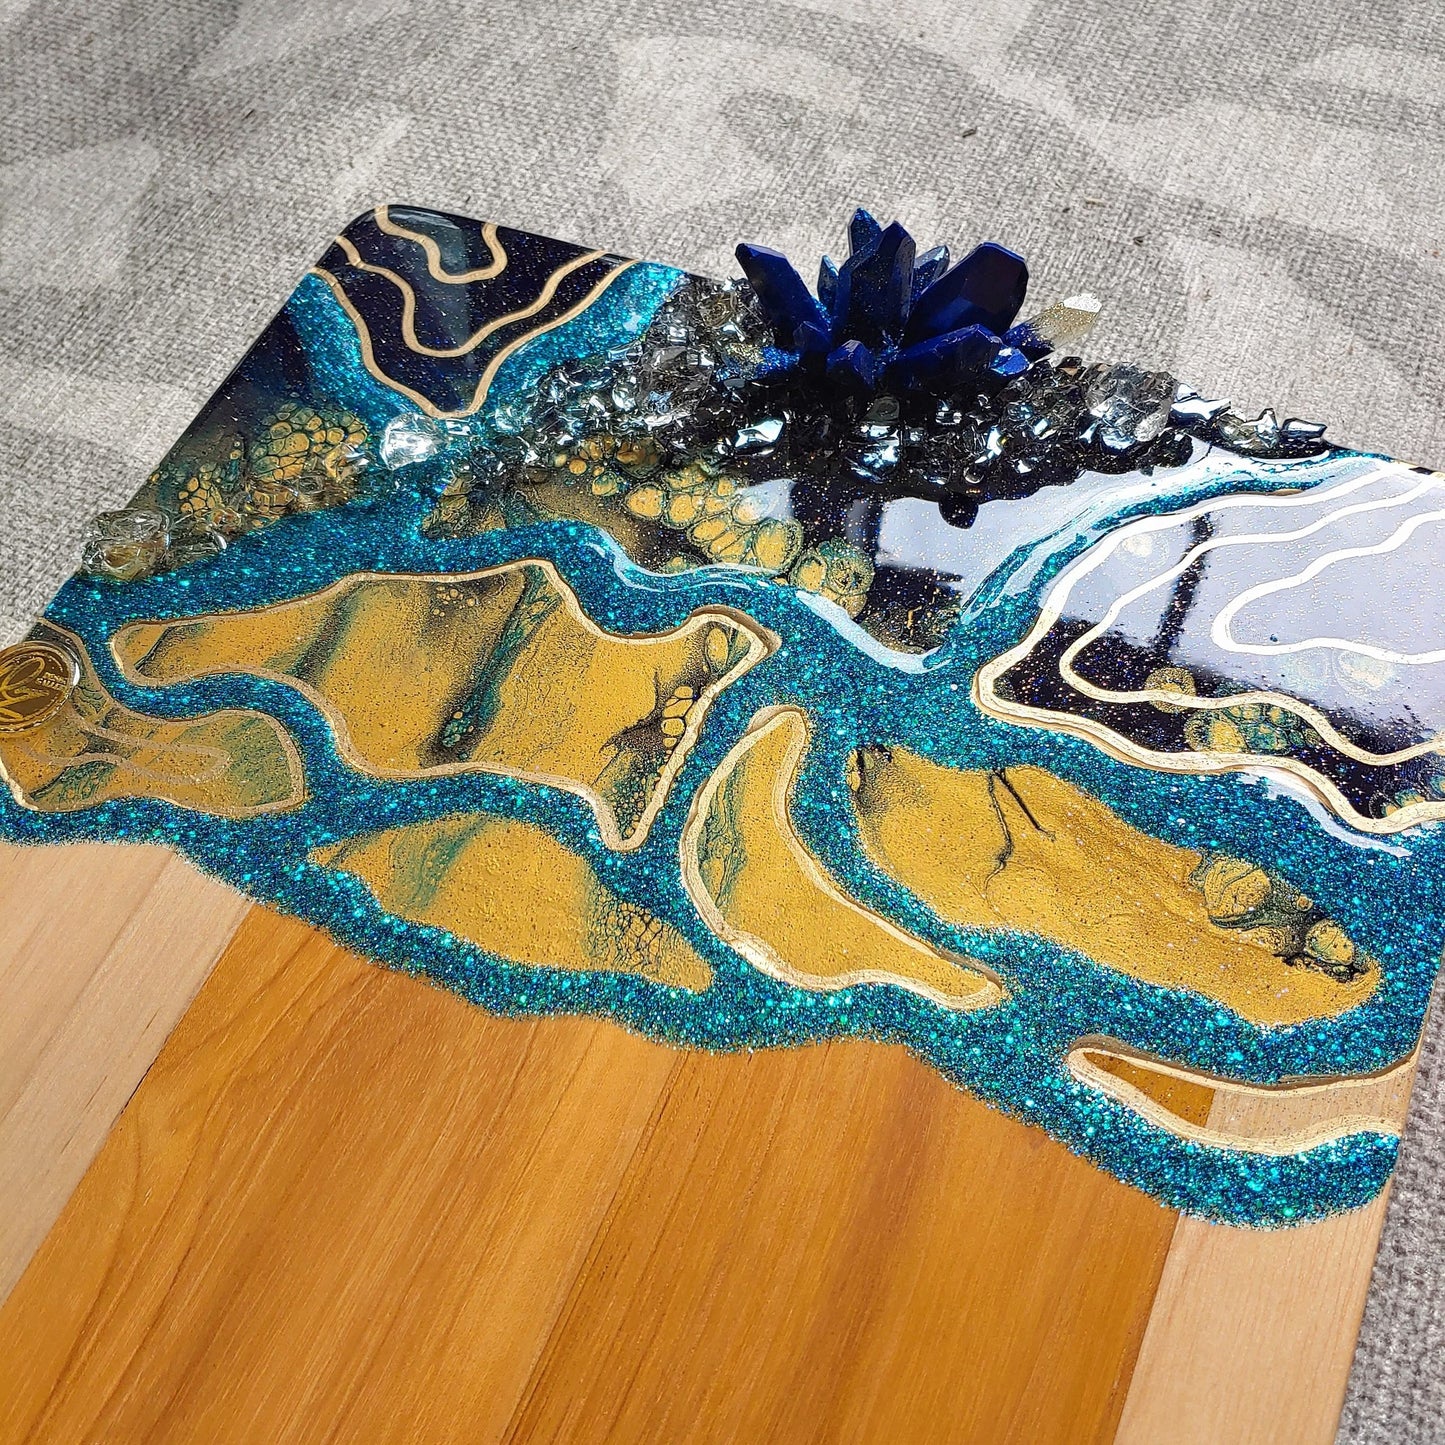 Geode style acacia cheeseboard in navy, turquoise and gold